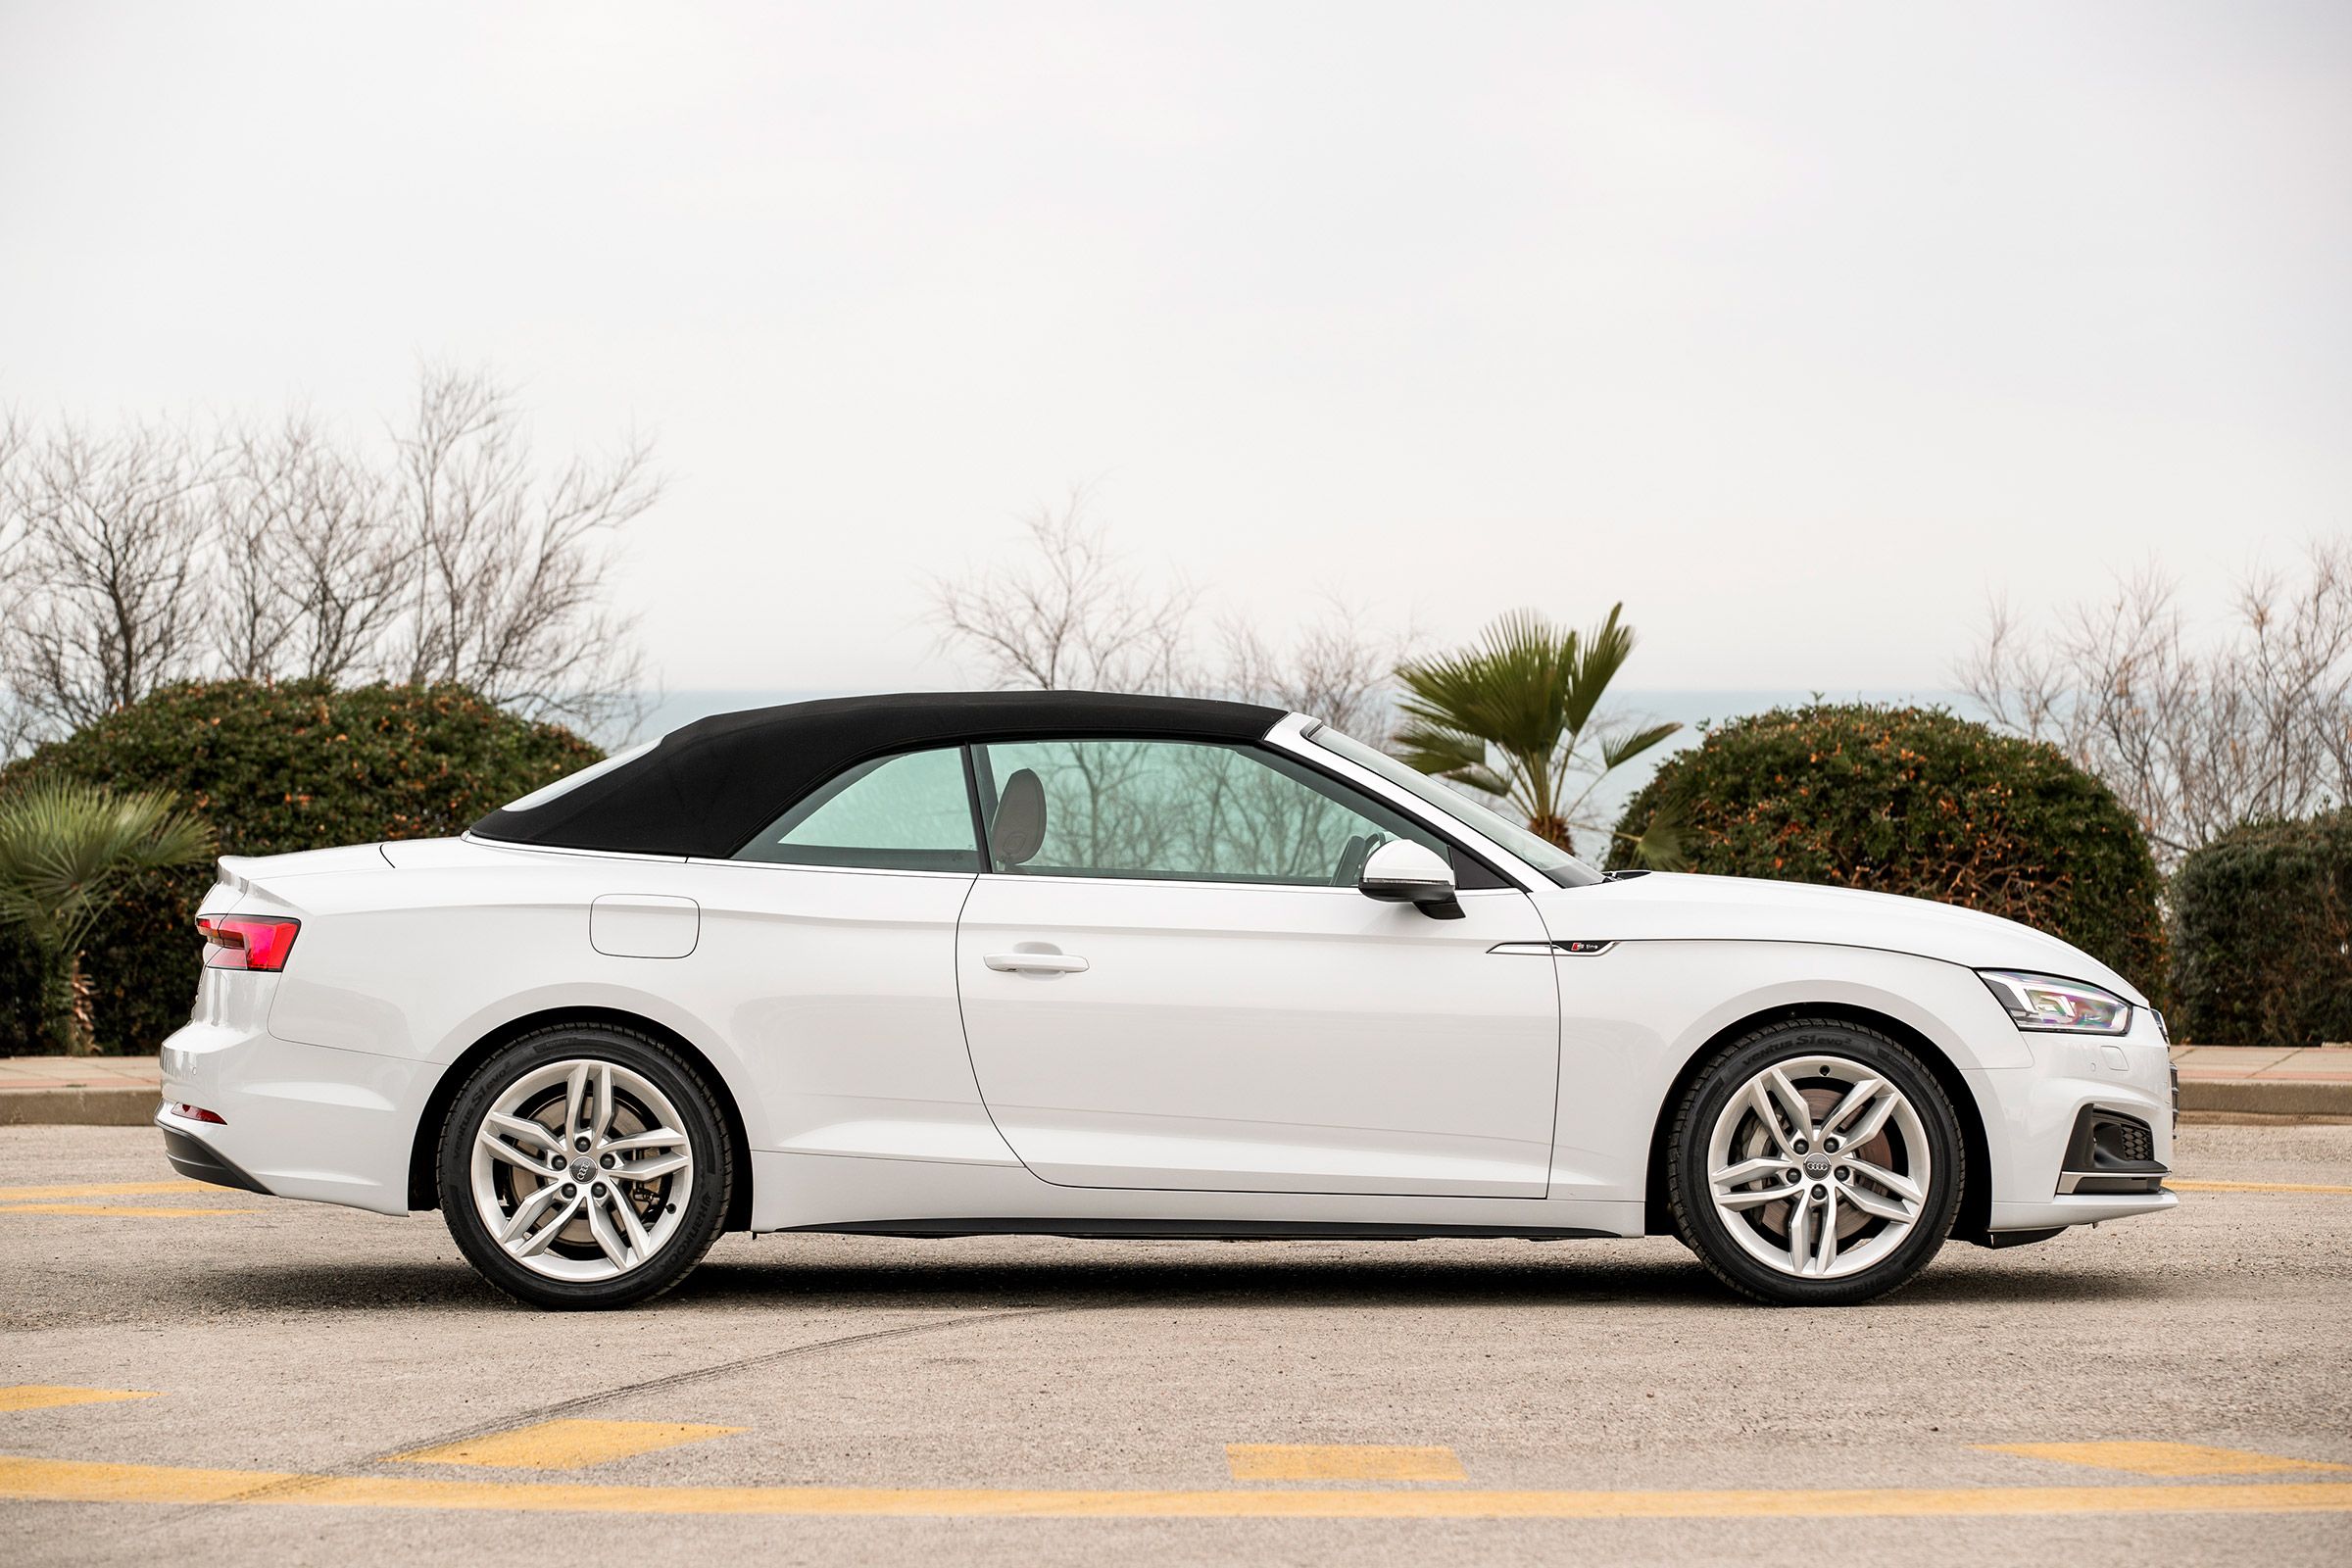 2017 Audi A5 Cabriolet Exterior White Side Roof Close (View 5 of 18)